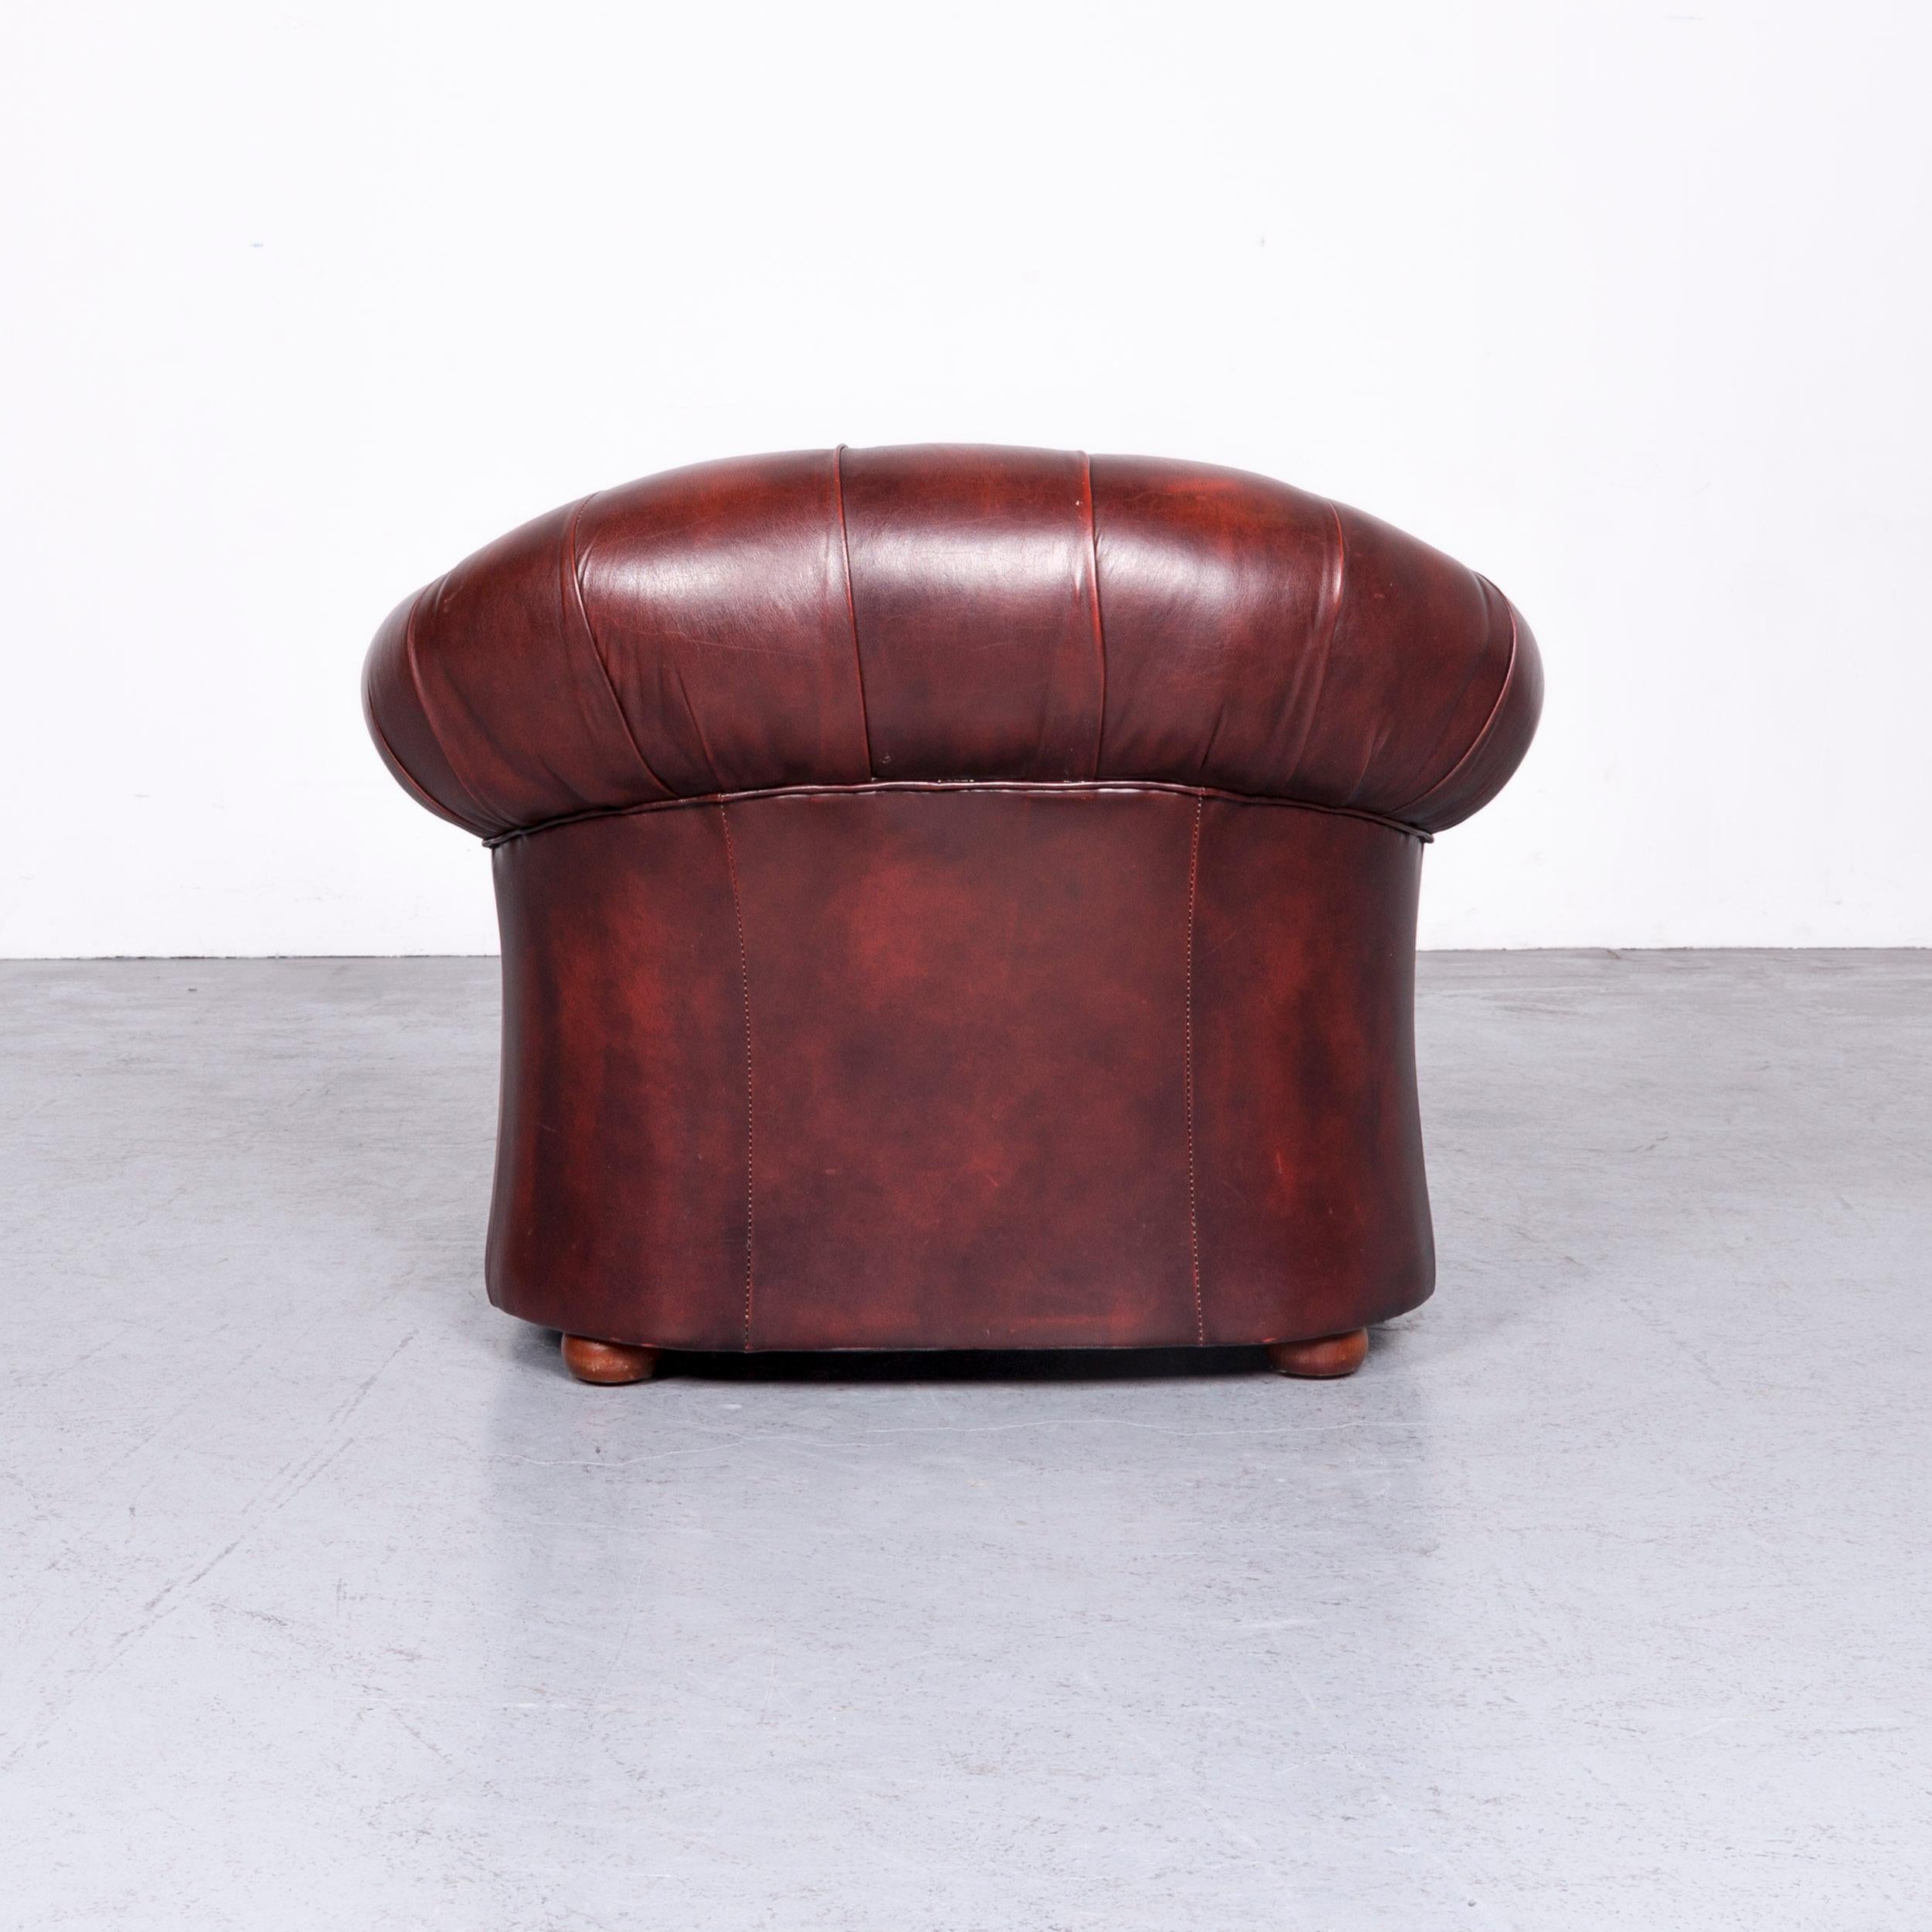 Contemporary Chesterfield Centurion Leather Armchair Red One-Seat Vintage Chair